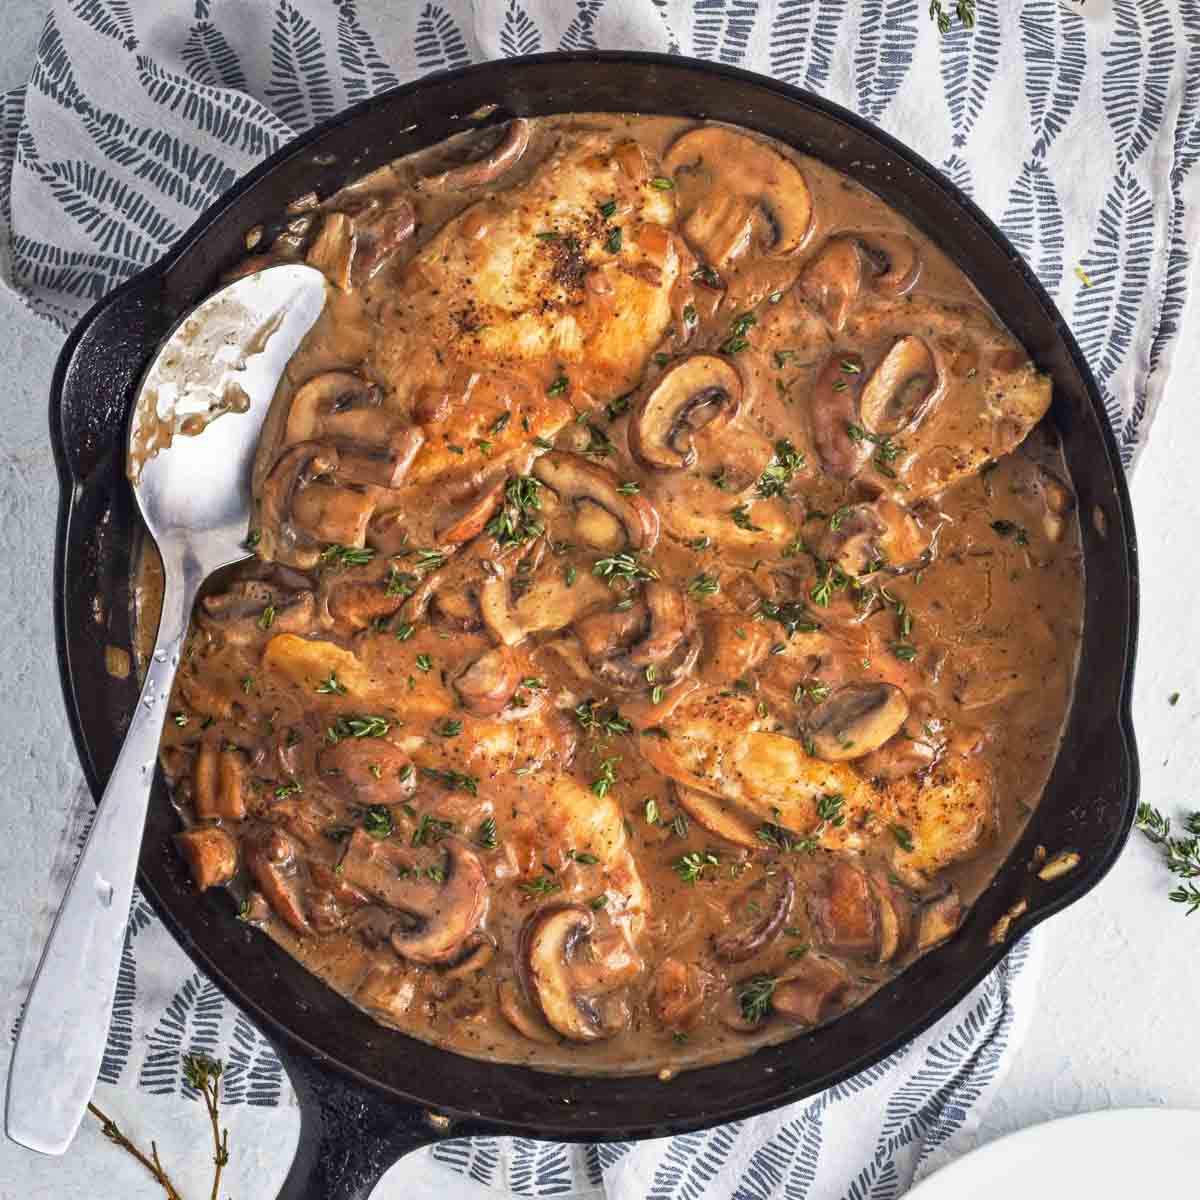 Skillet with creamy chicken with mushrooms